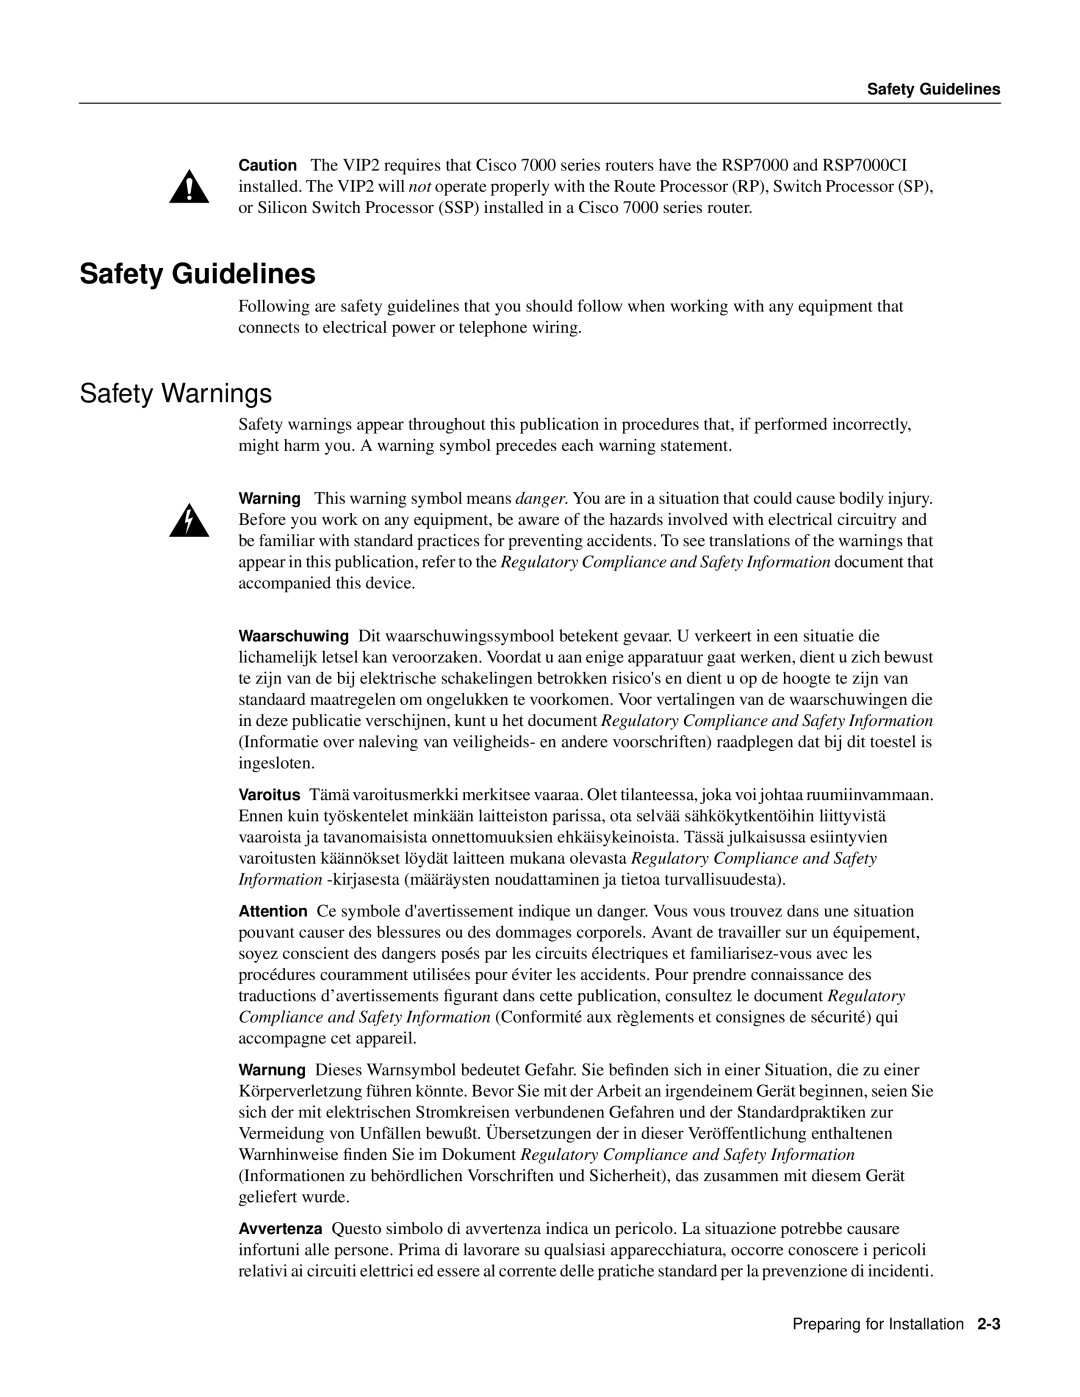 Cisco Systems PA-FE-FX, PA-FE-TX manual Safety Guidelines, Safety Warnings 